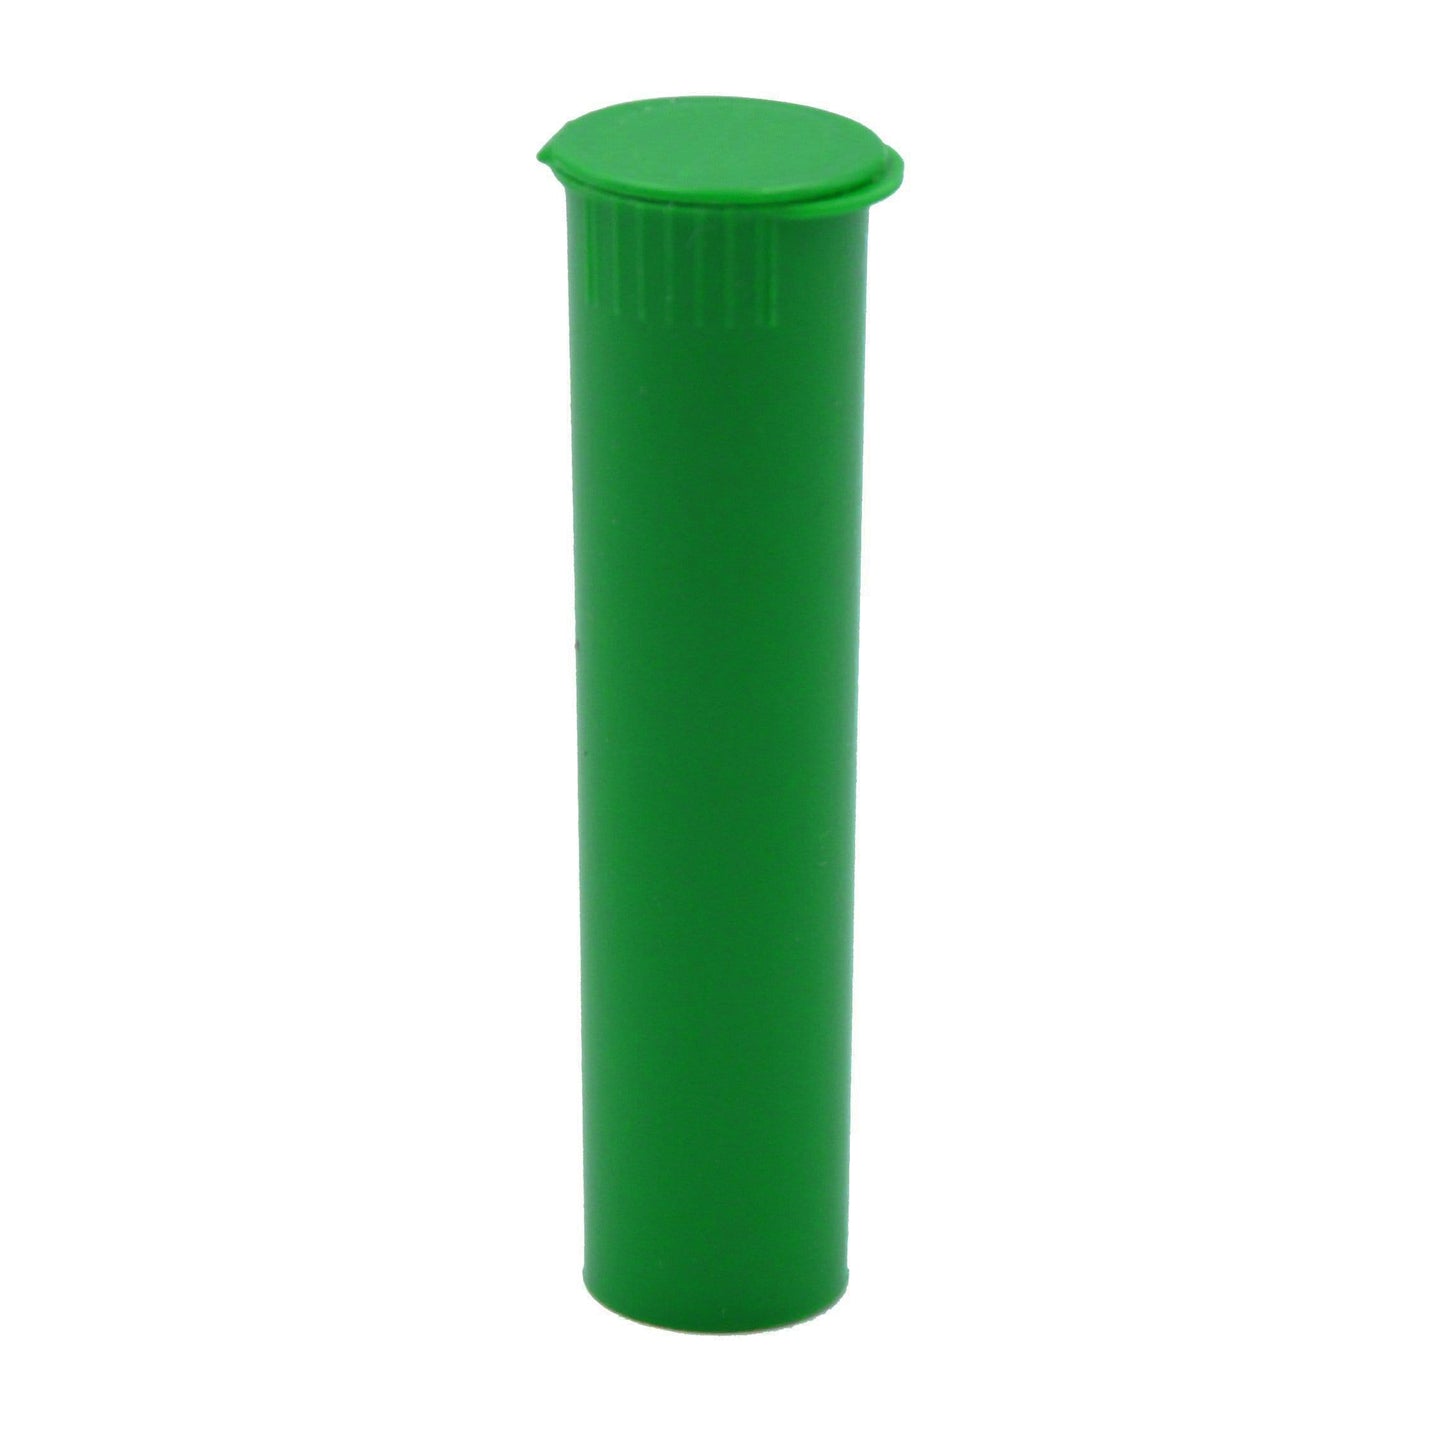 Squeeze Top Child-Resistant 78mm J-Tube Green